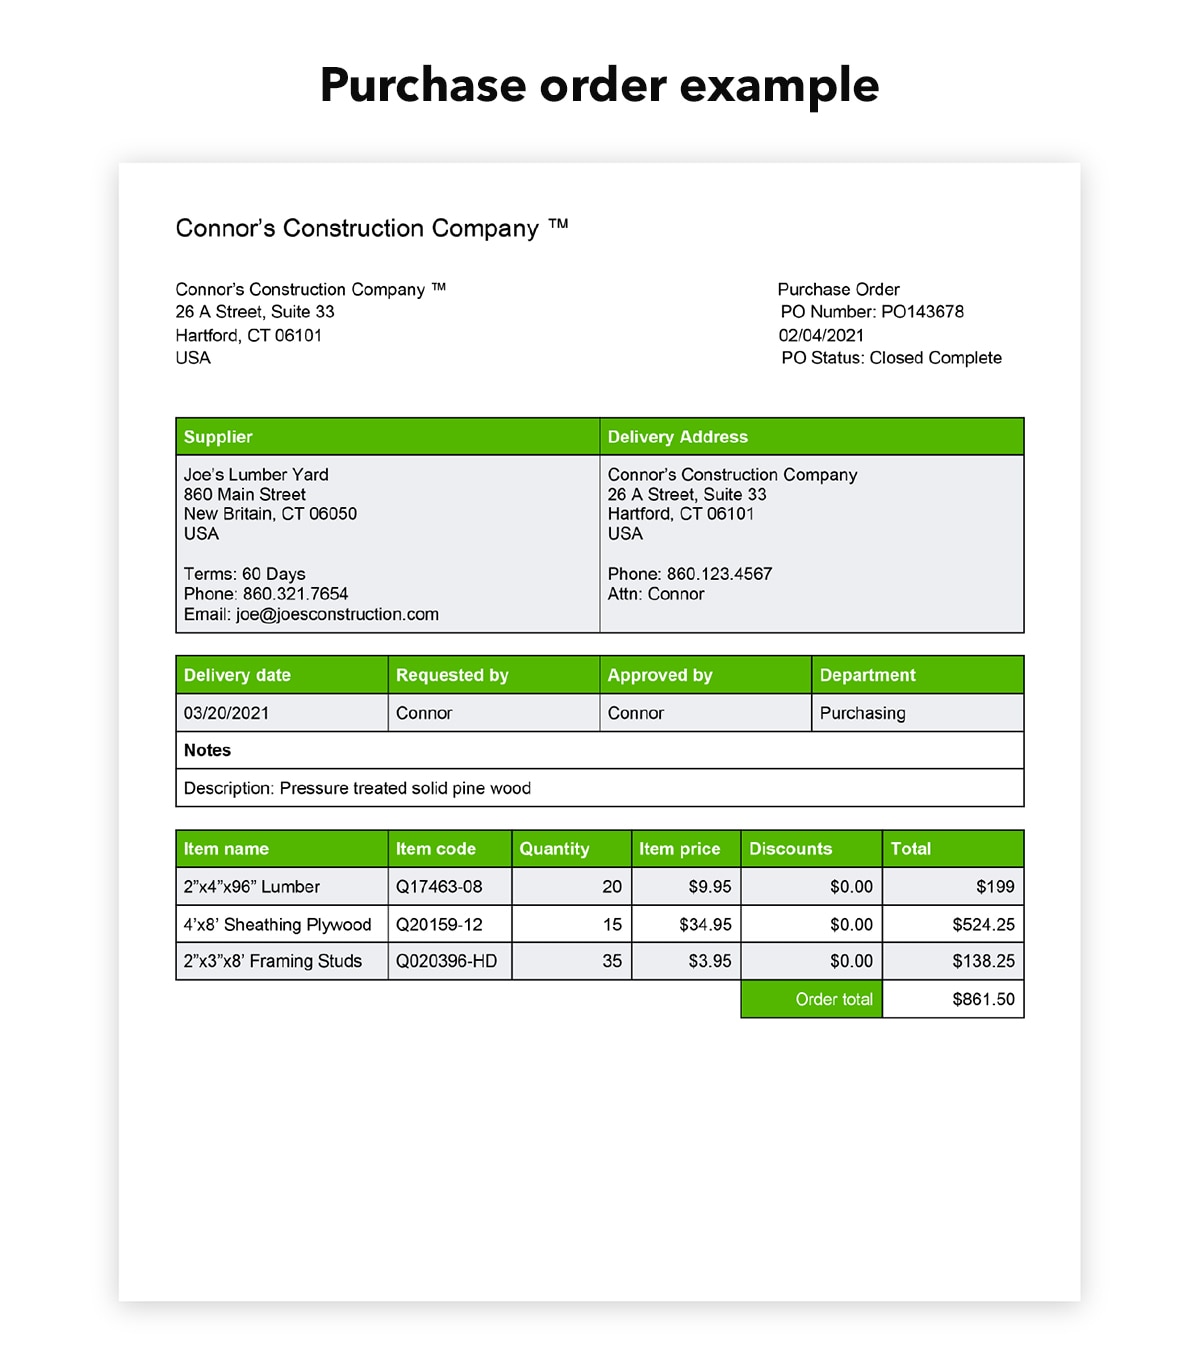 Example of purchase order